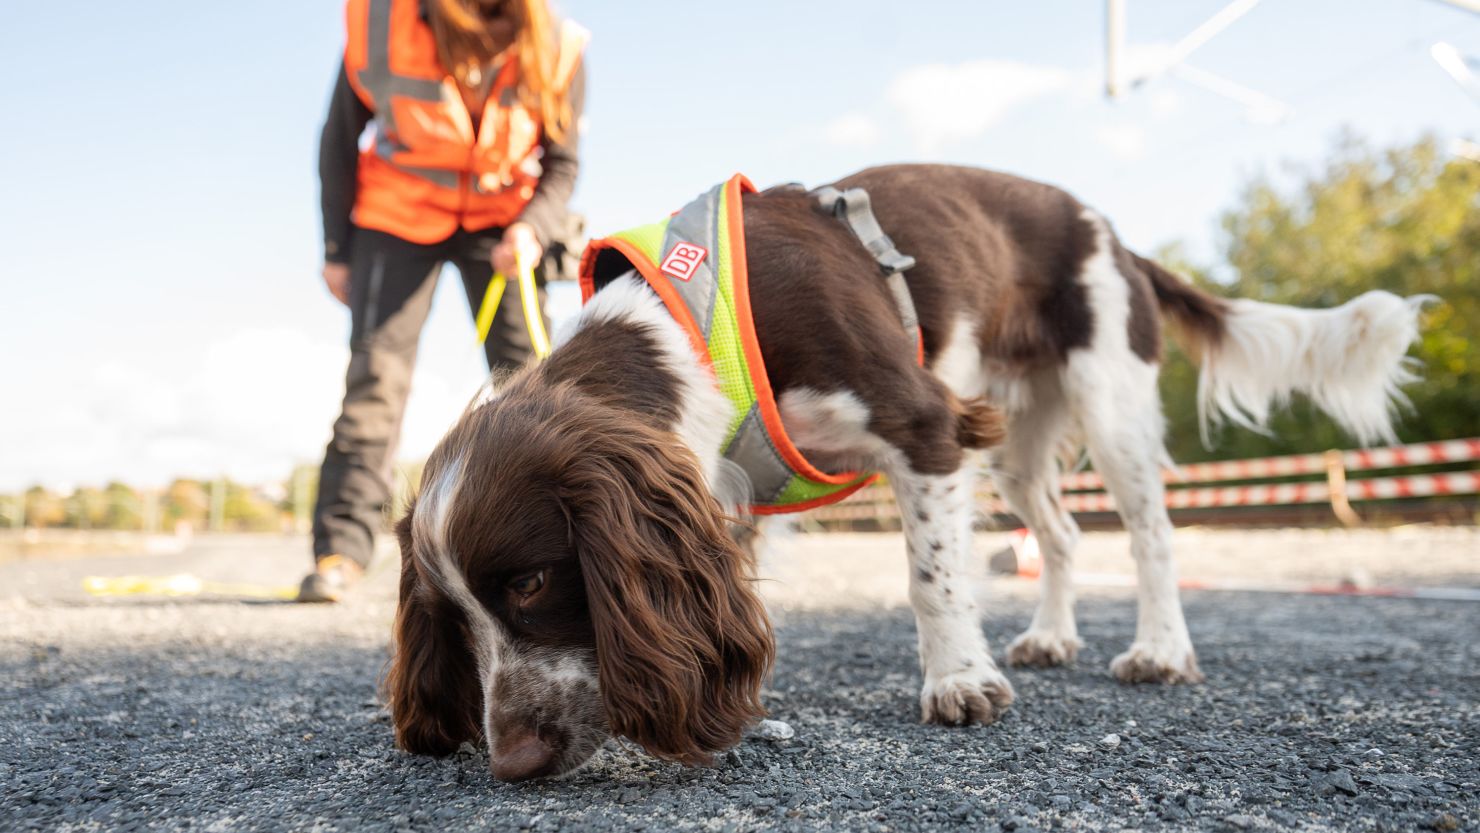 Species protection sniffer dog Monte searches for a marker during a press event at a S-Bahn construction site. 